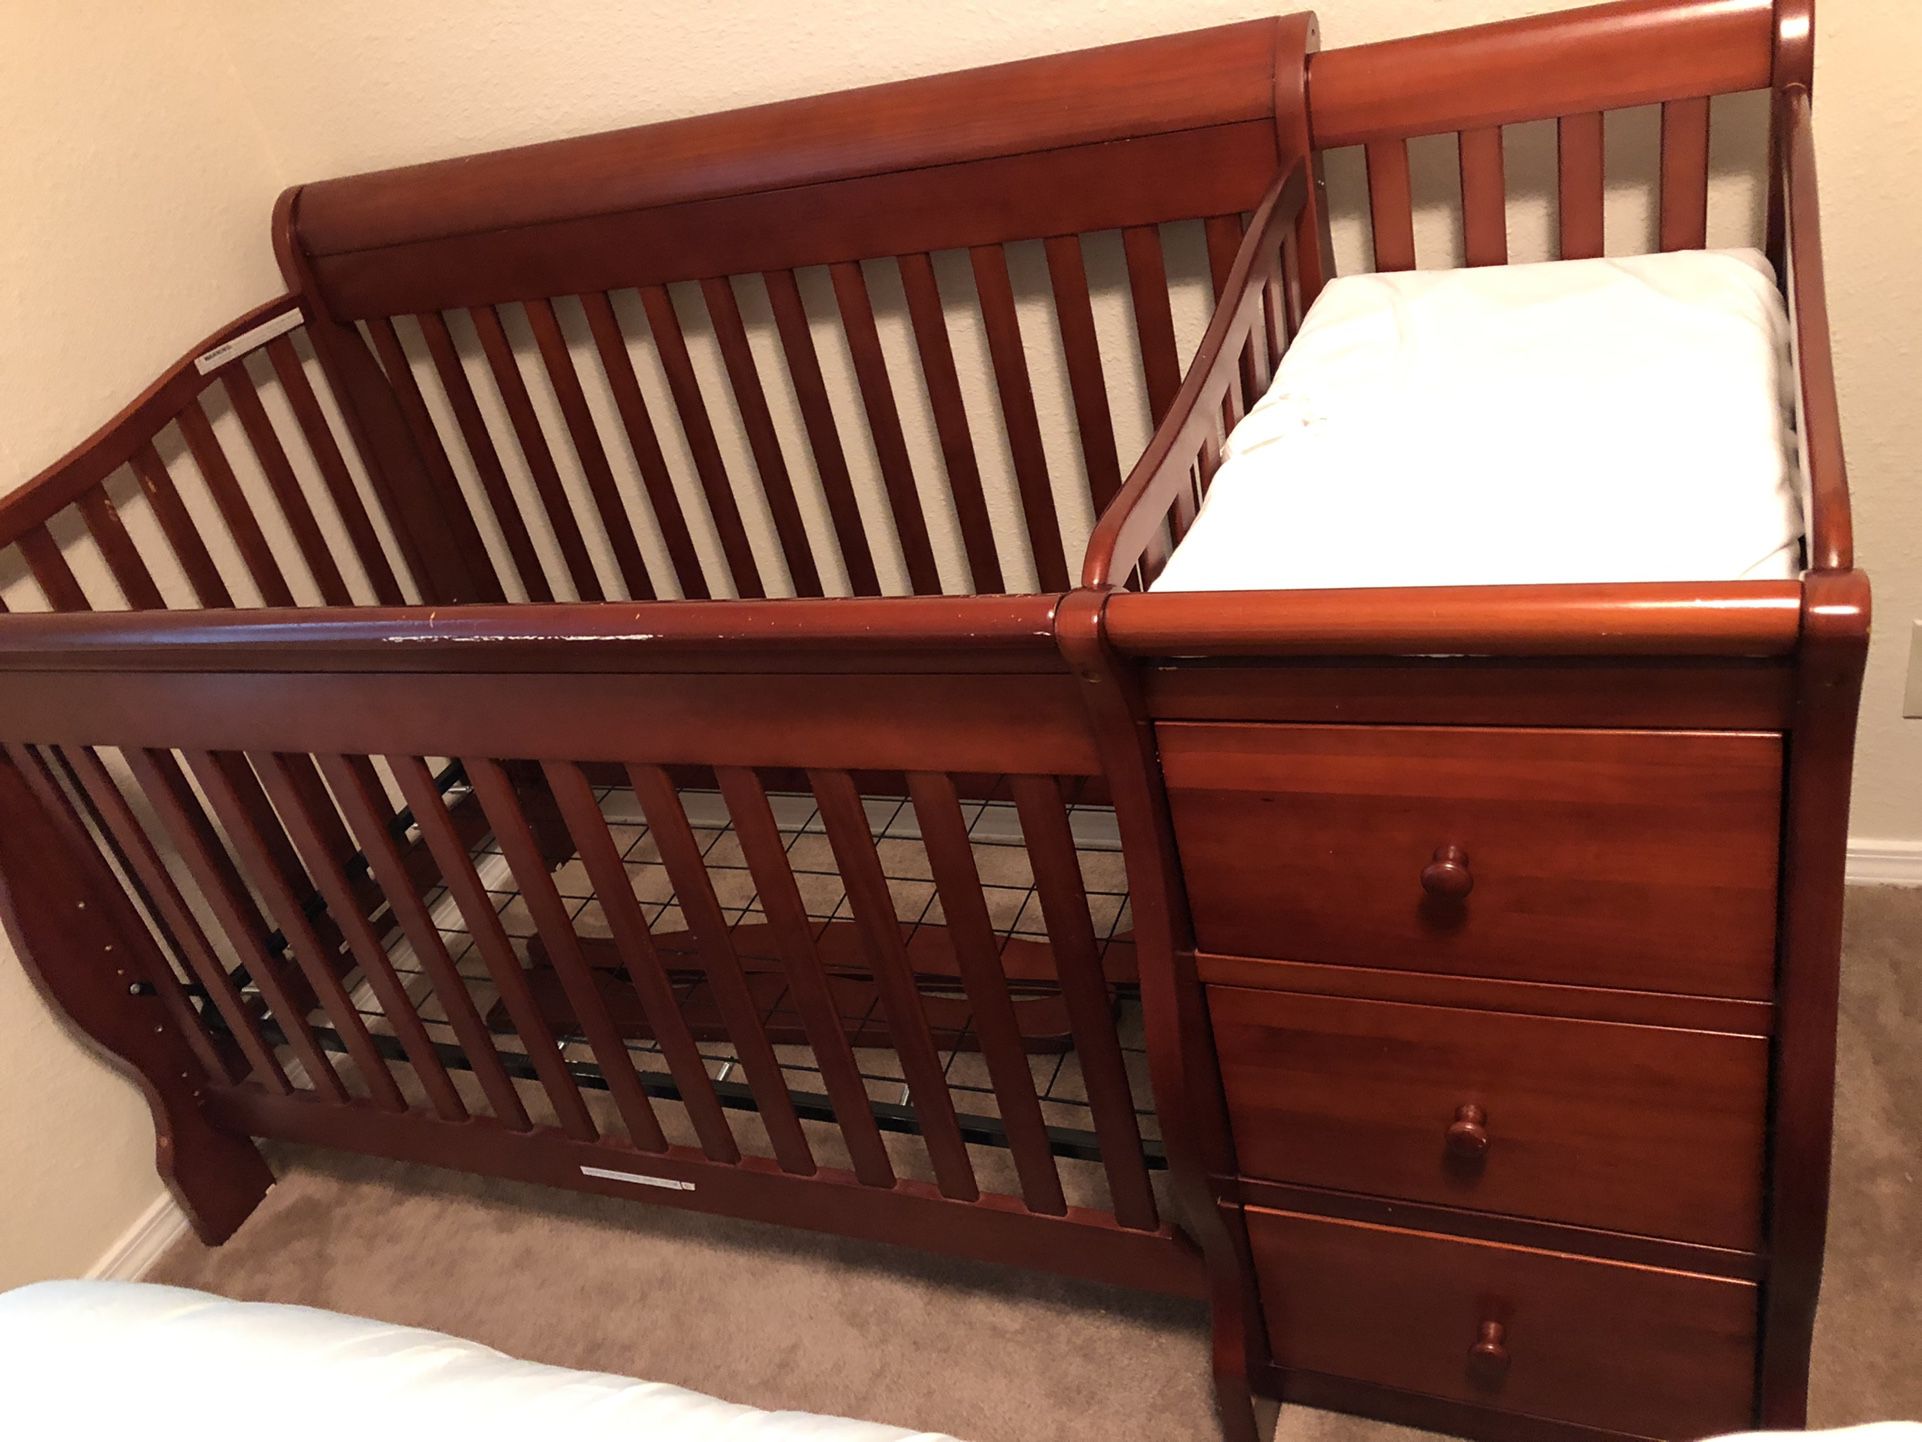 Baby crib that converts into a twin bed no mattress also has attached changing table